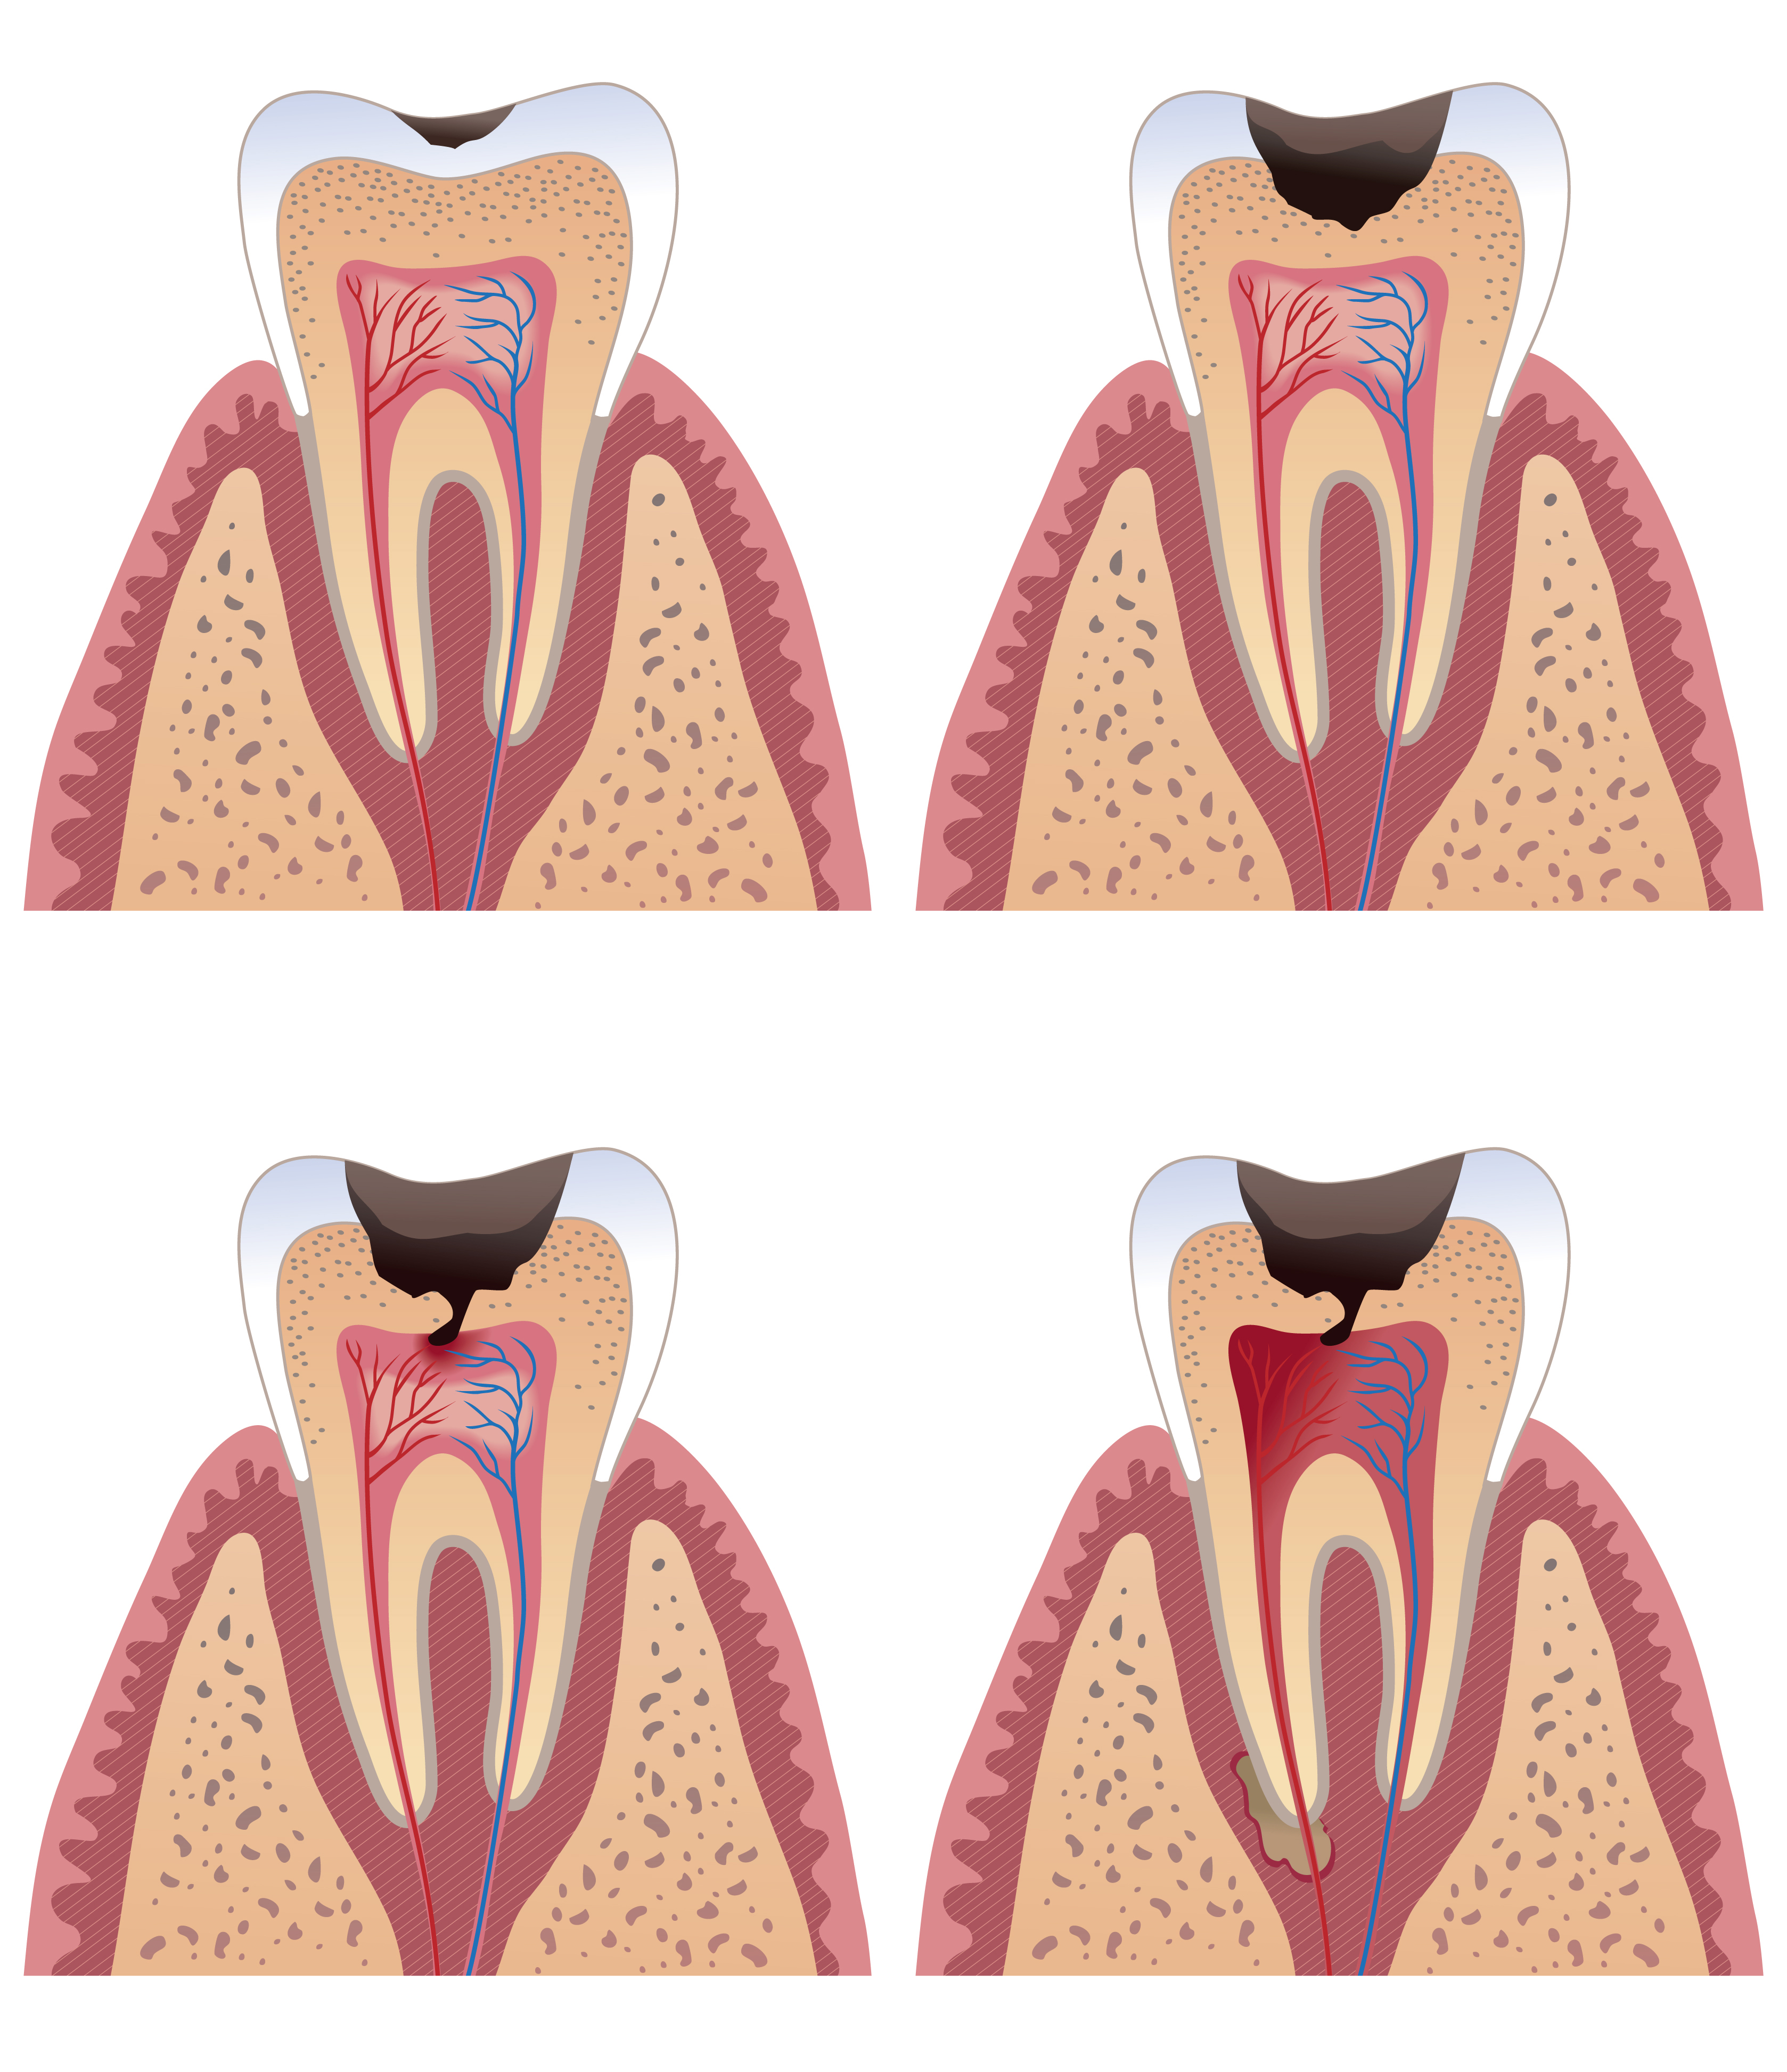 Caries stages